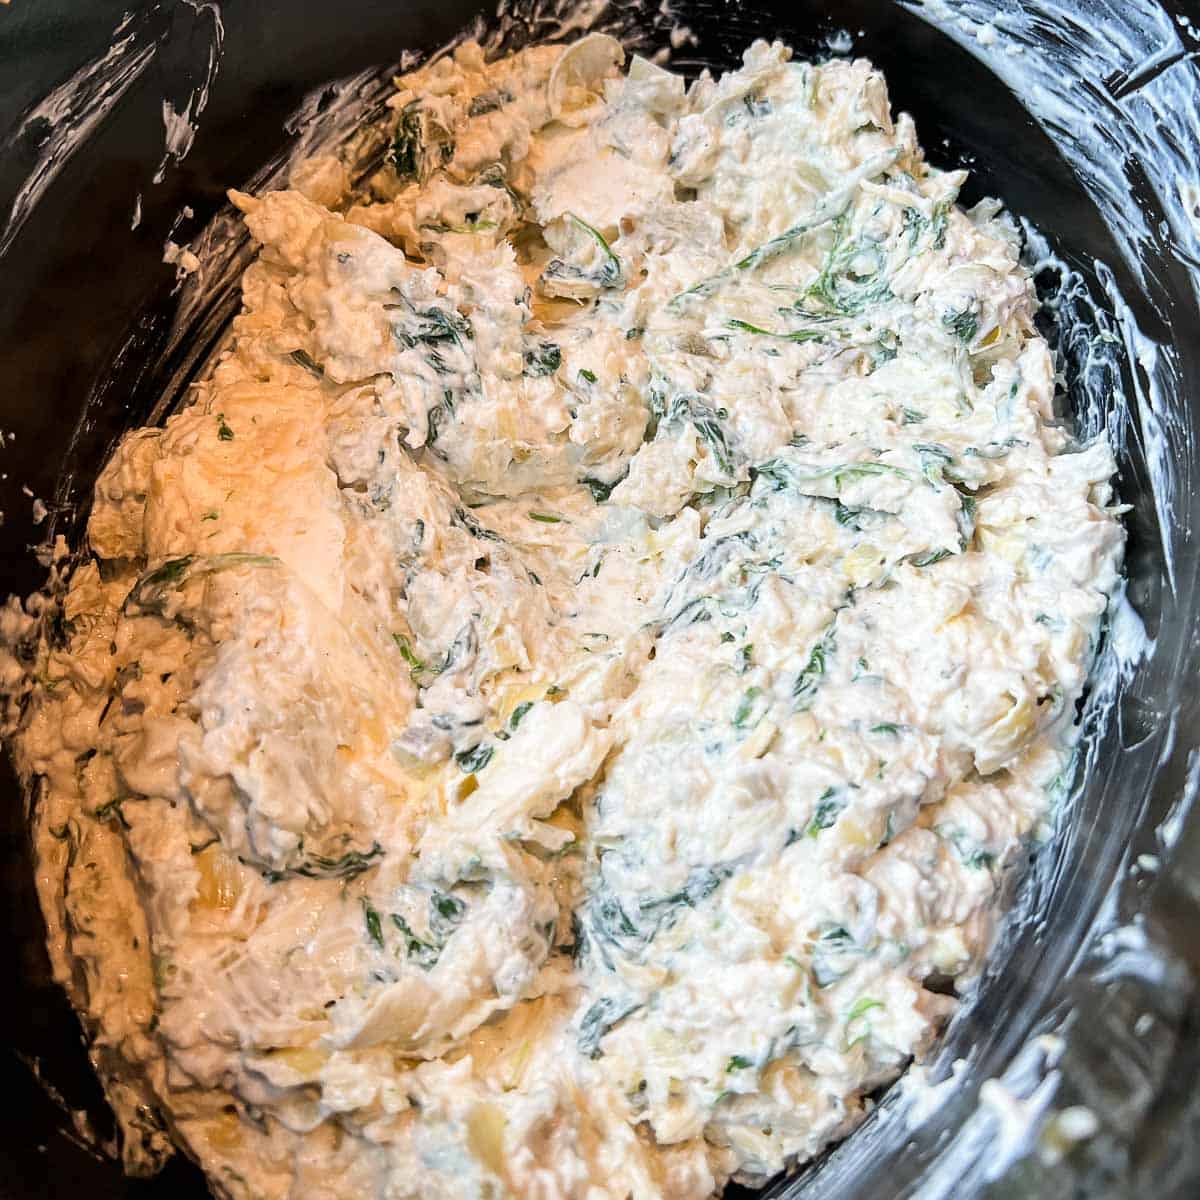 Ingredients for Spinach Artichoke Dip Recipe mixed together in a crockpot.